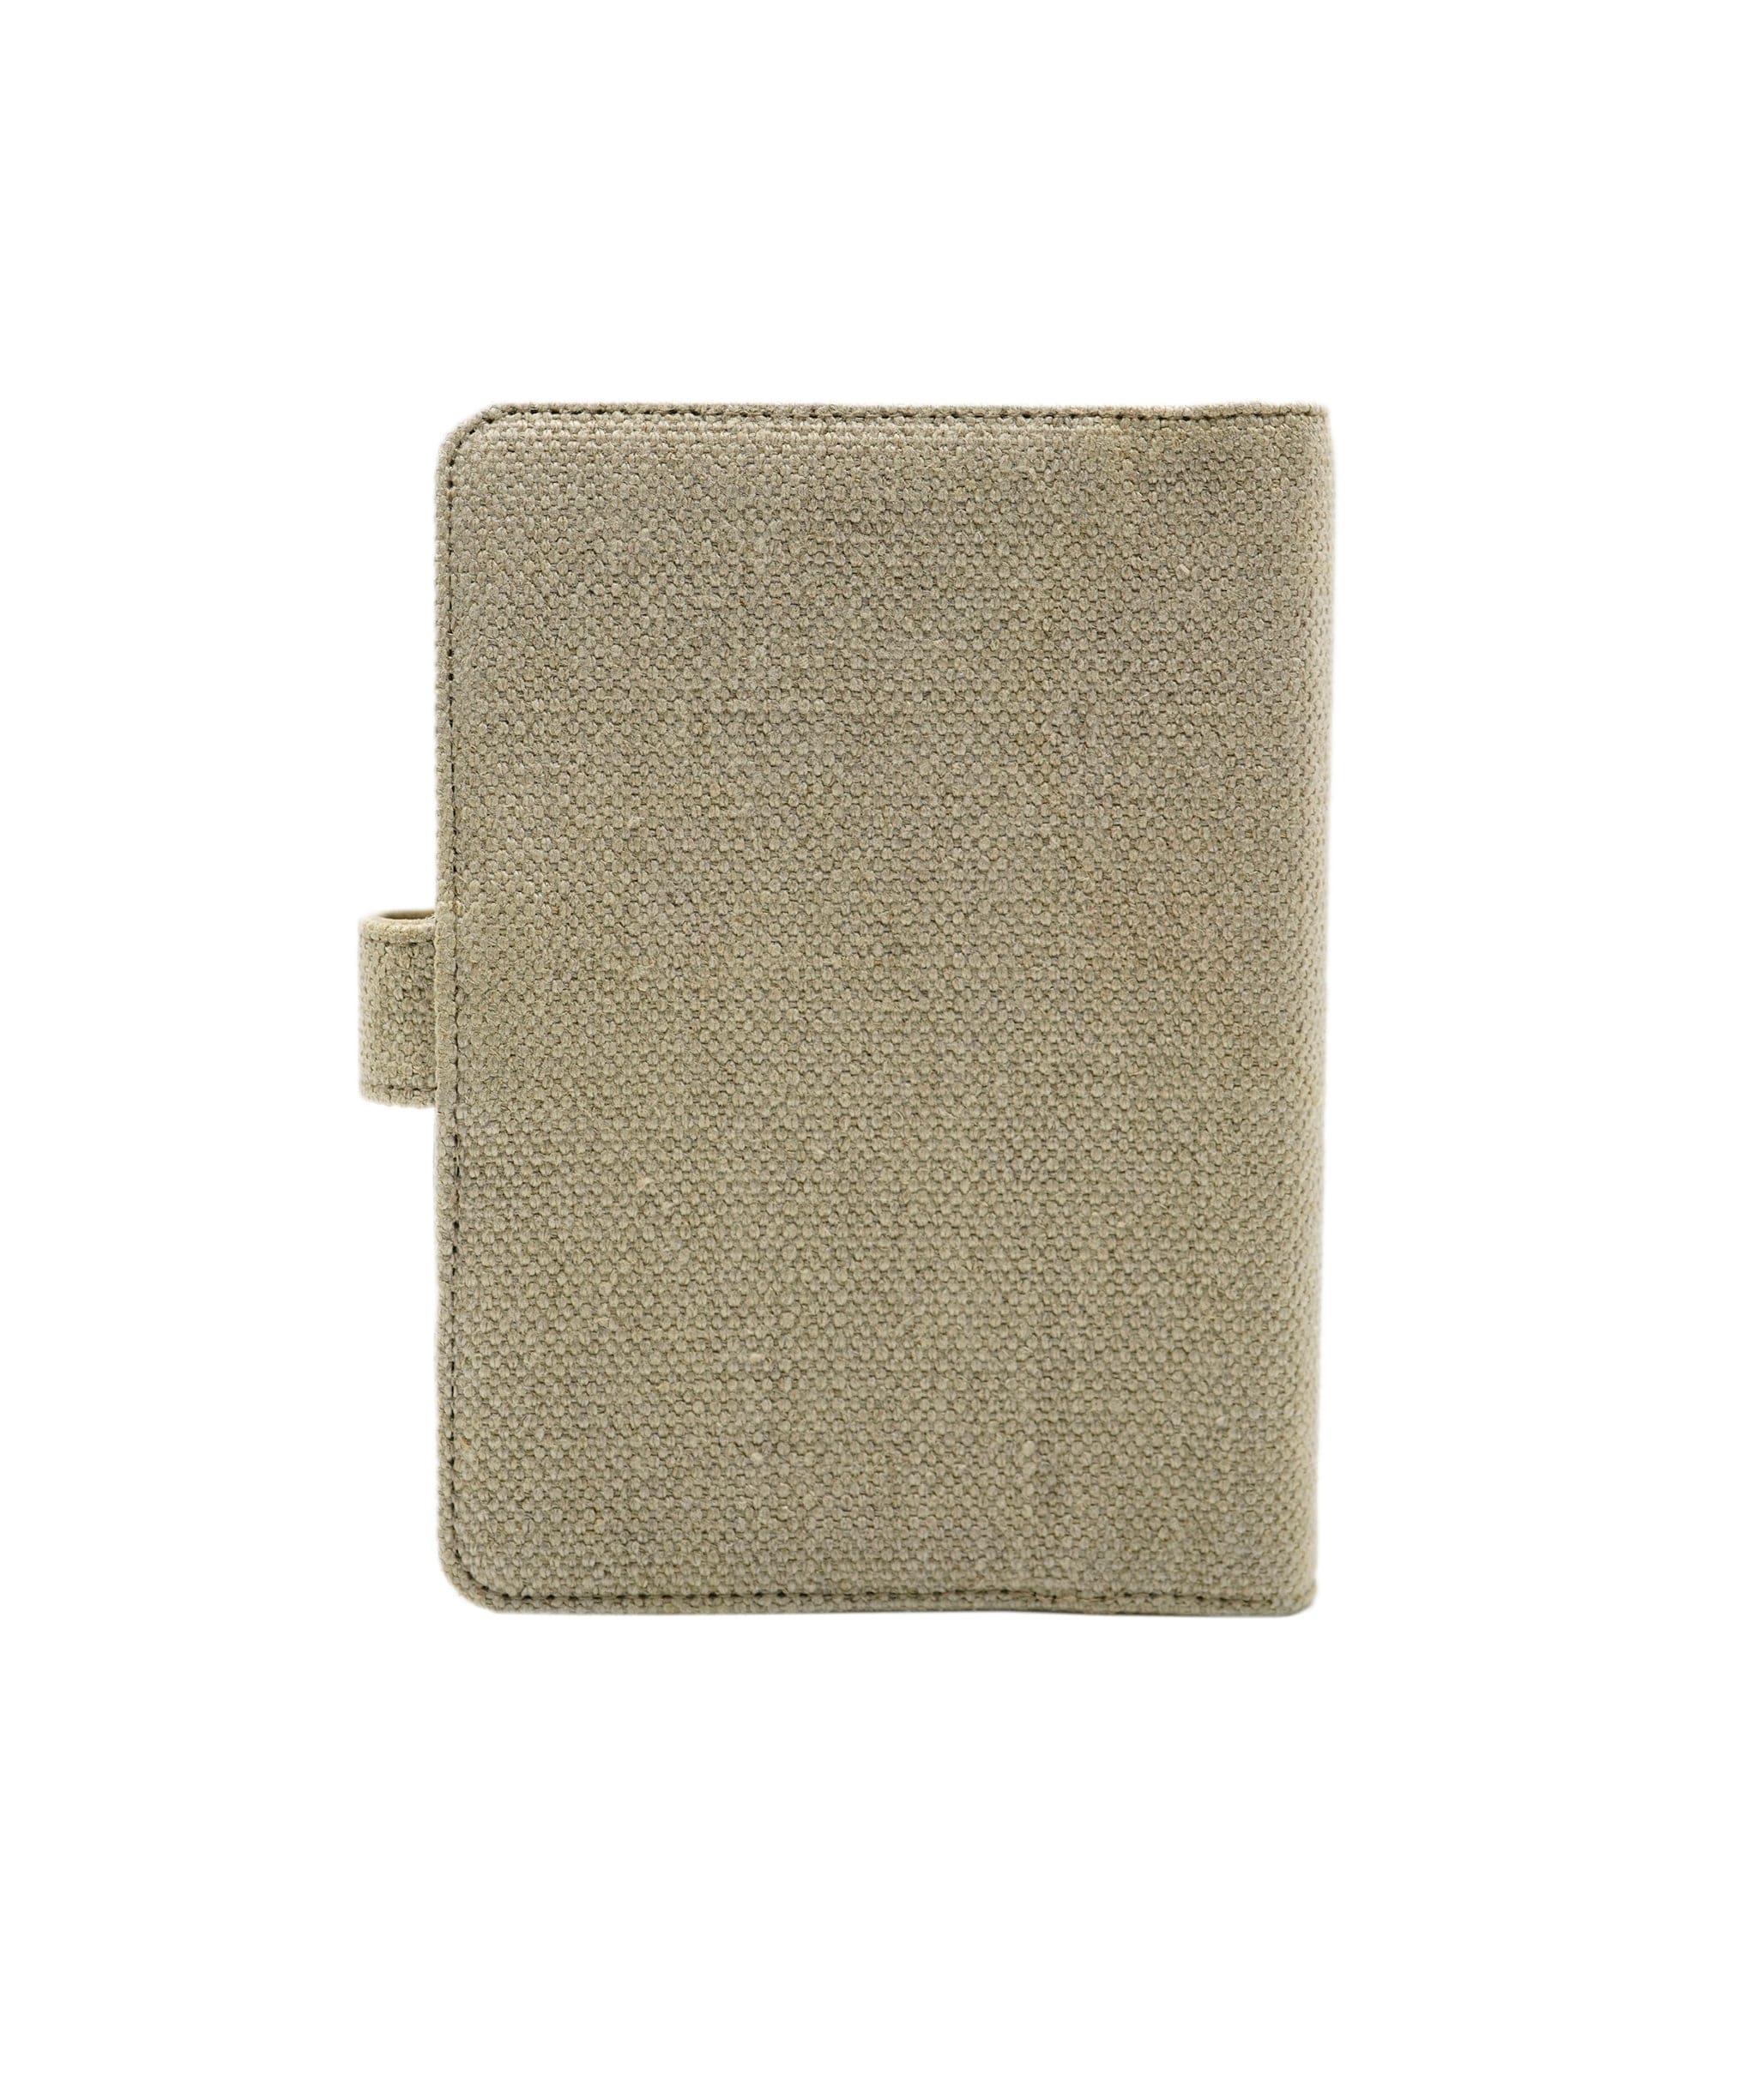 Chanel Chanel 1997 Diary Cover Beige ASL9238